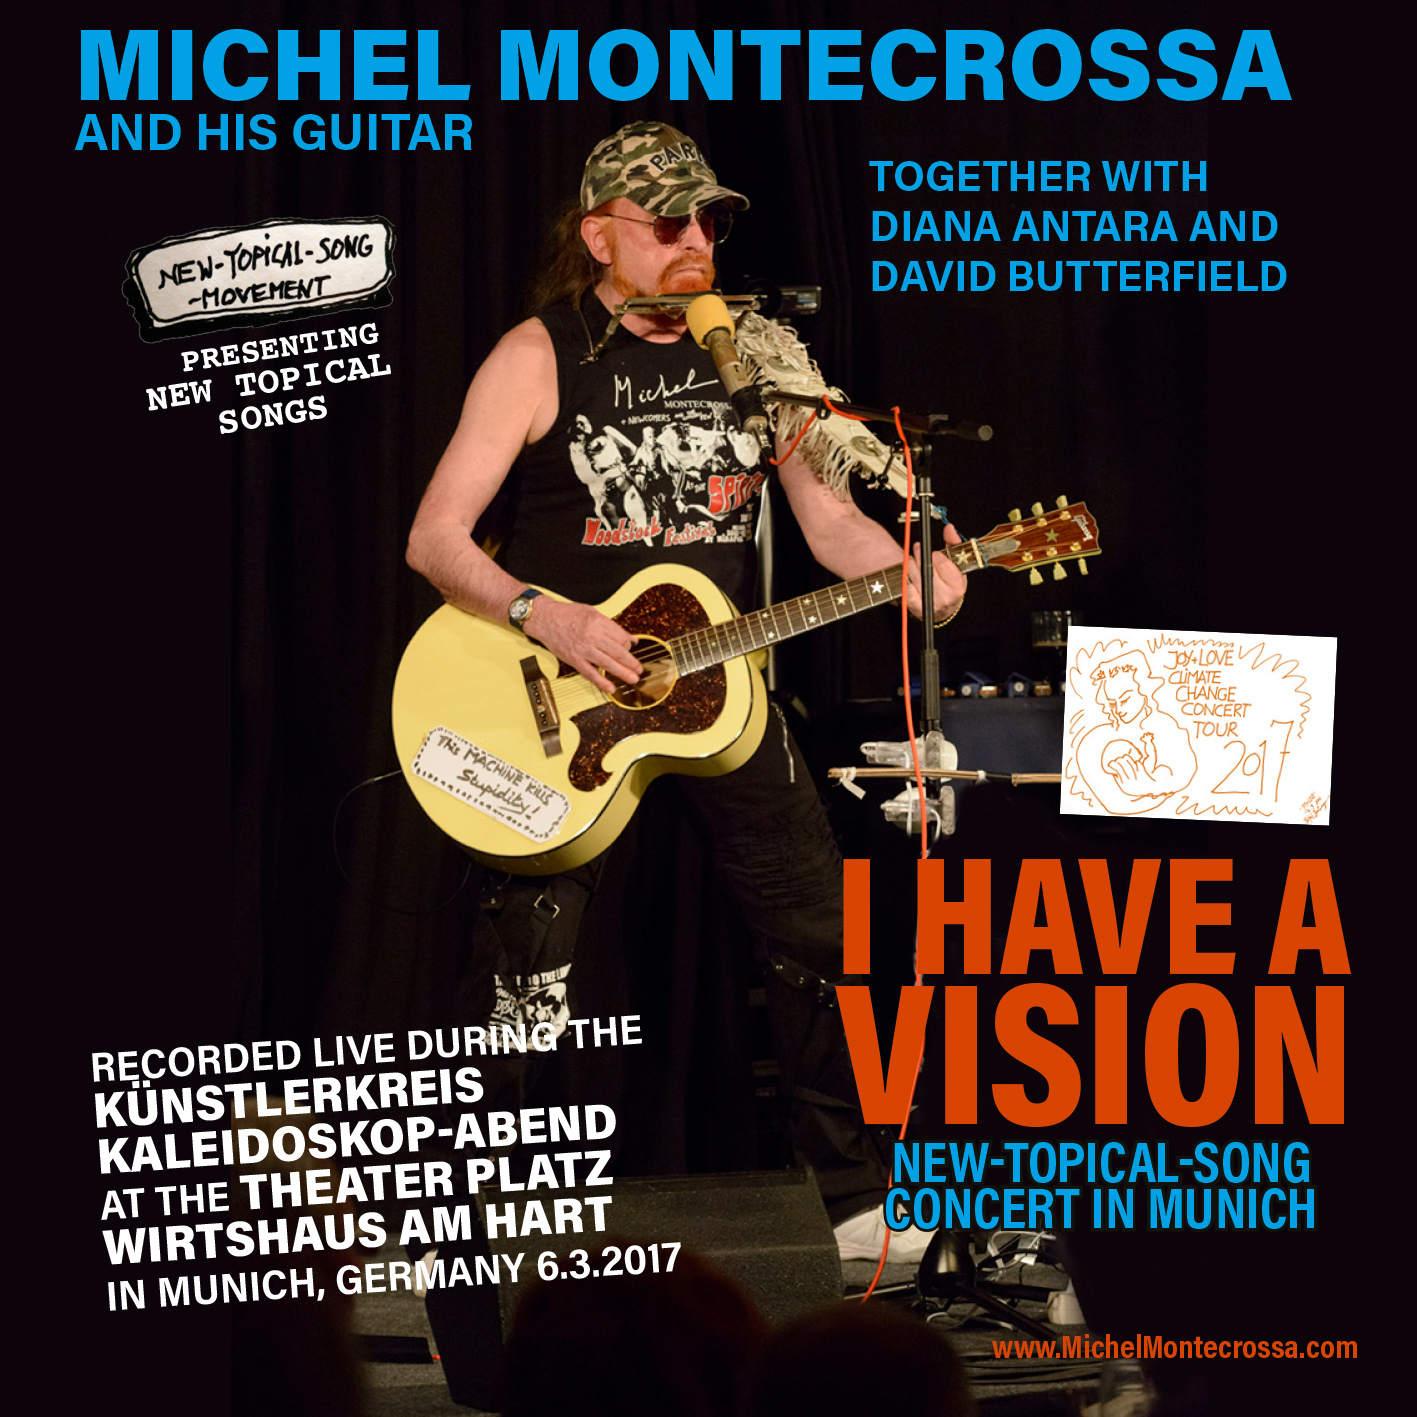 I Have A Vision New-Topical-Song Concert in Munich